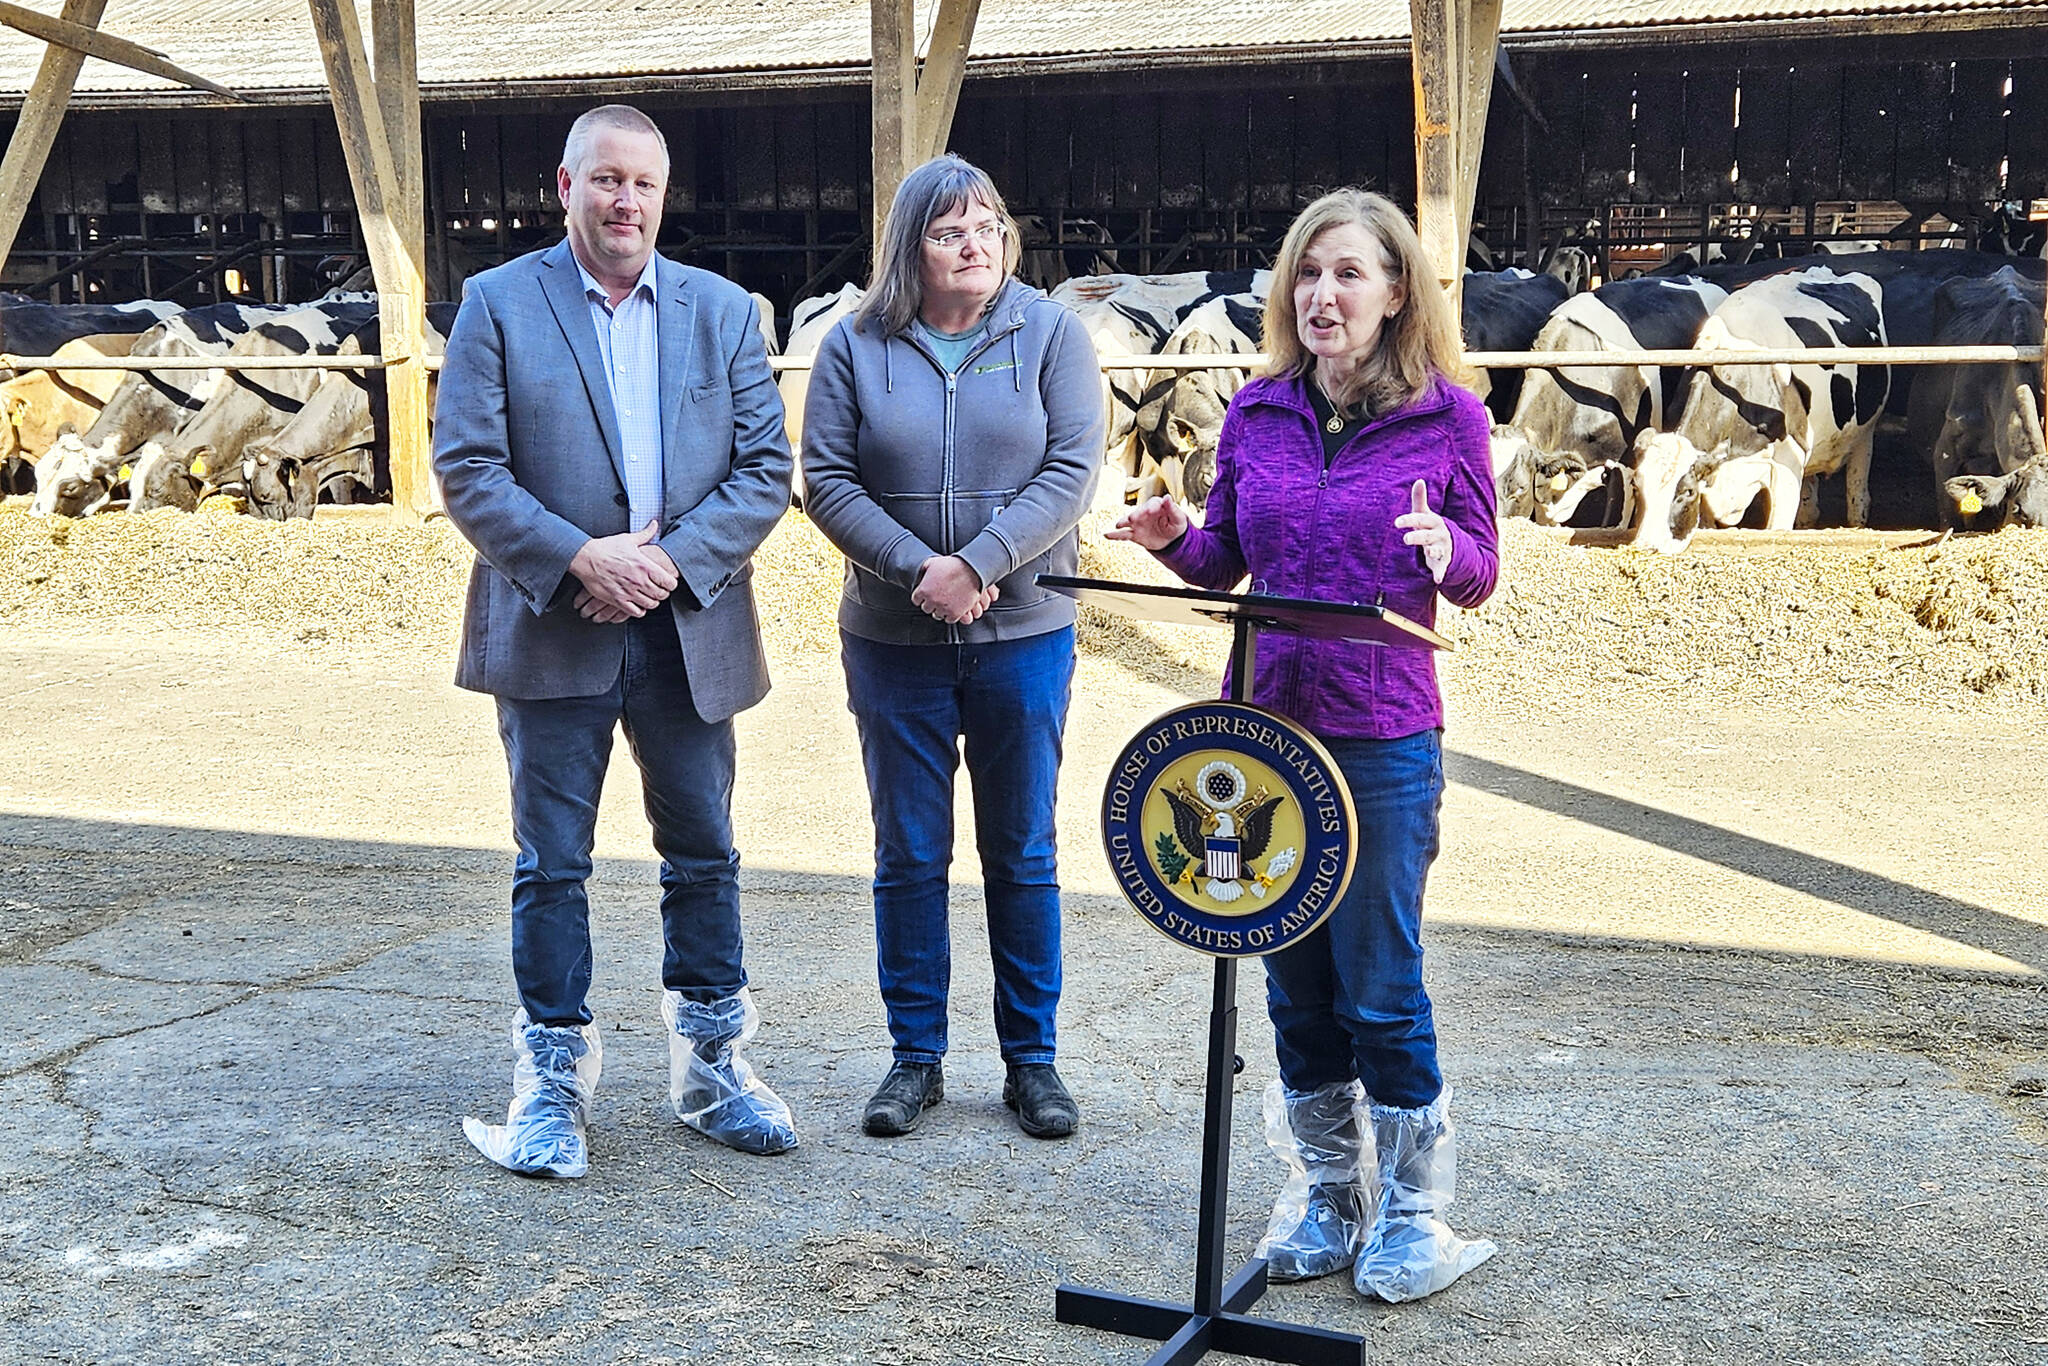 Rep. Kim Schrier (D-8) held a press conference with local dairy farmer Leann Krainick and Alan Huttema, interim CEO at Darigold. Photo by Ray Miller-Still